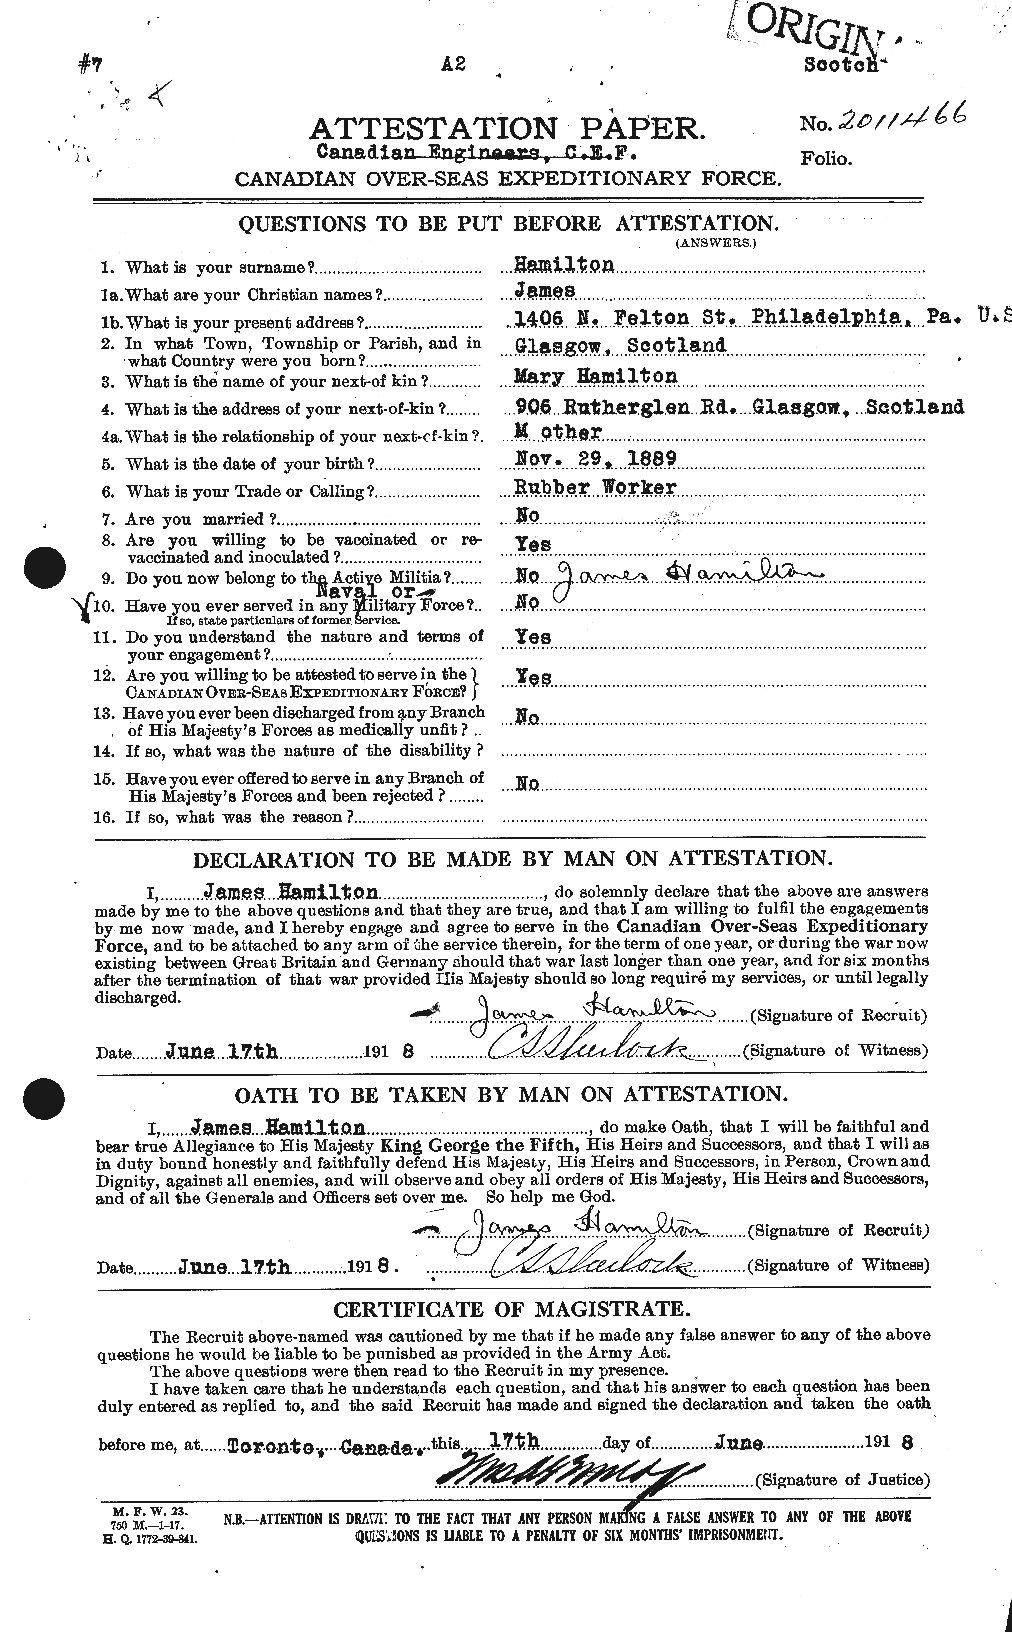 Personnel Records of the First World War - CEF 372936a